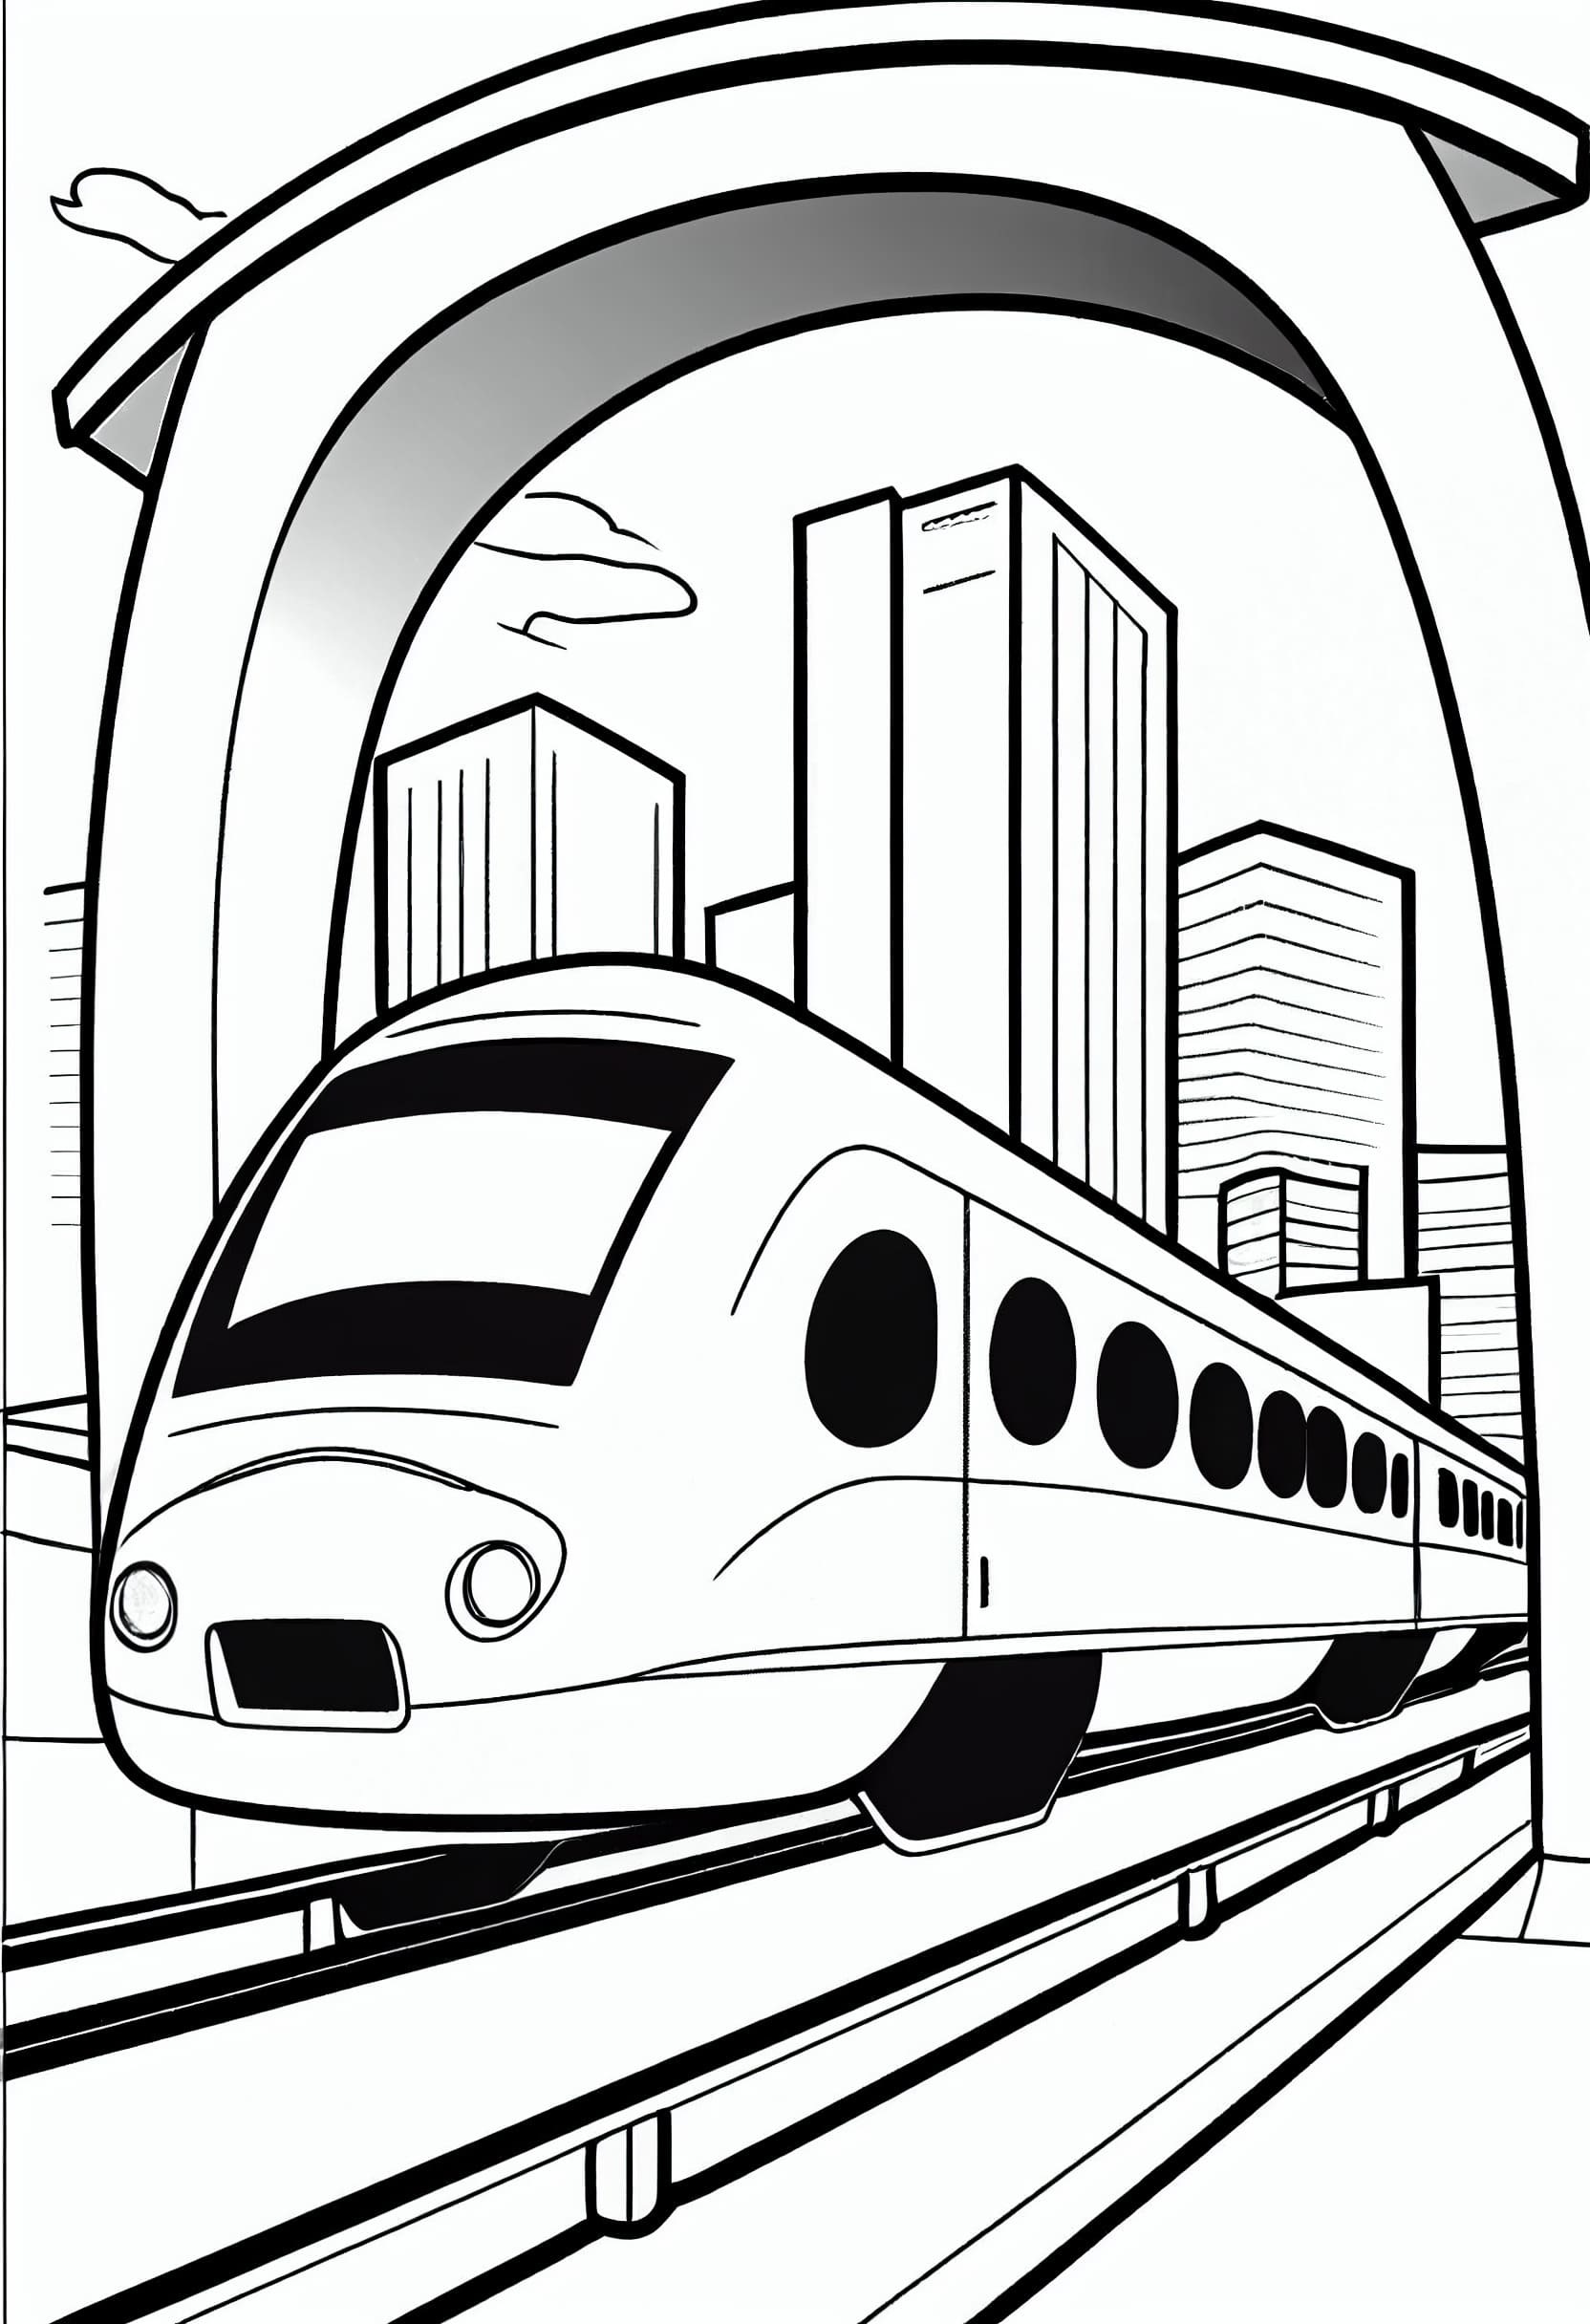 50 Train Coloring Pages: Free Printable ...